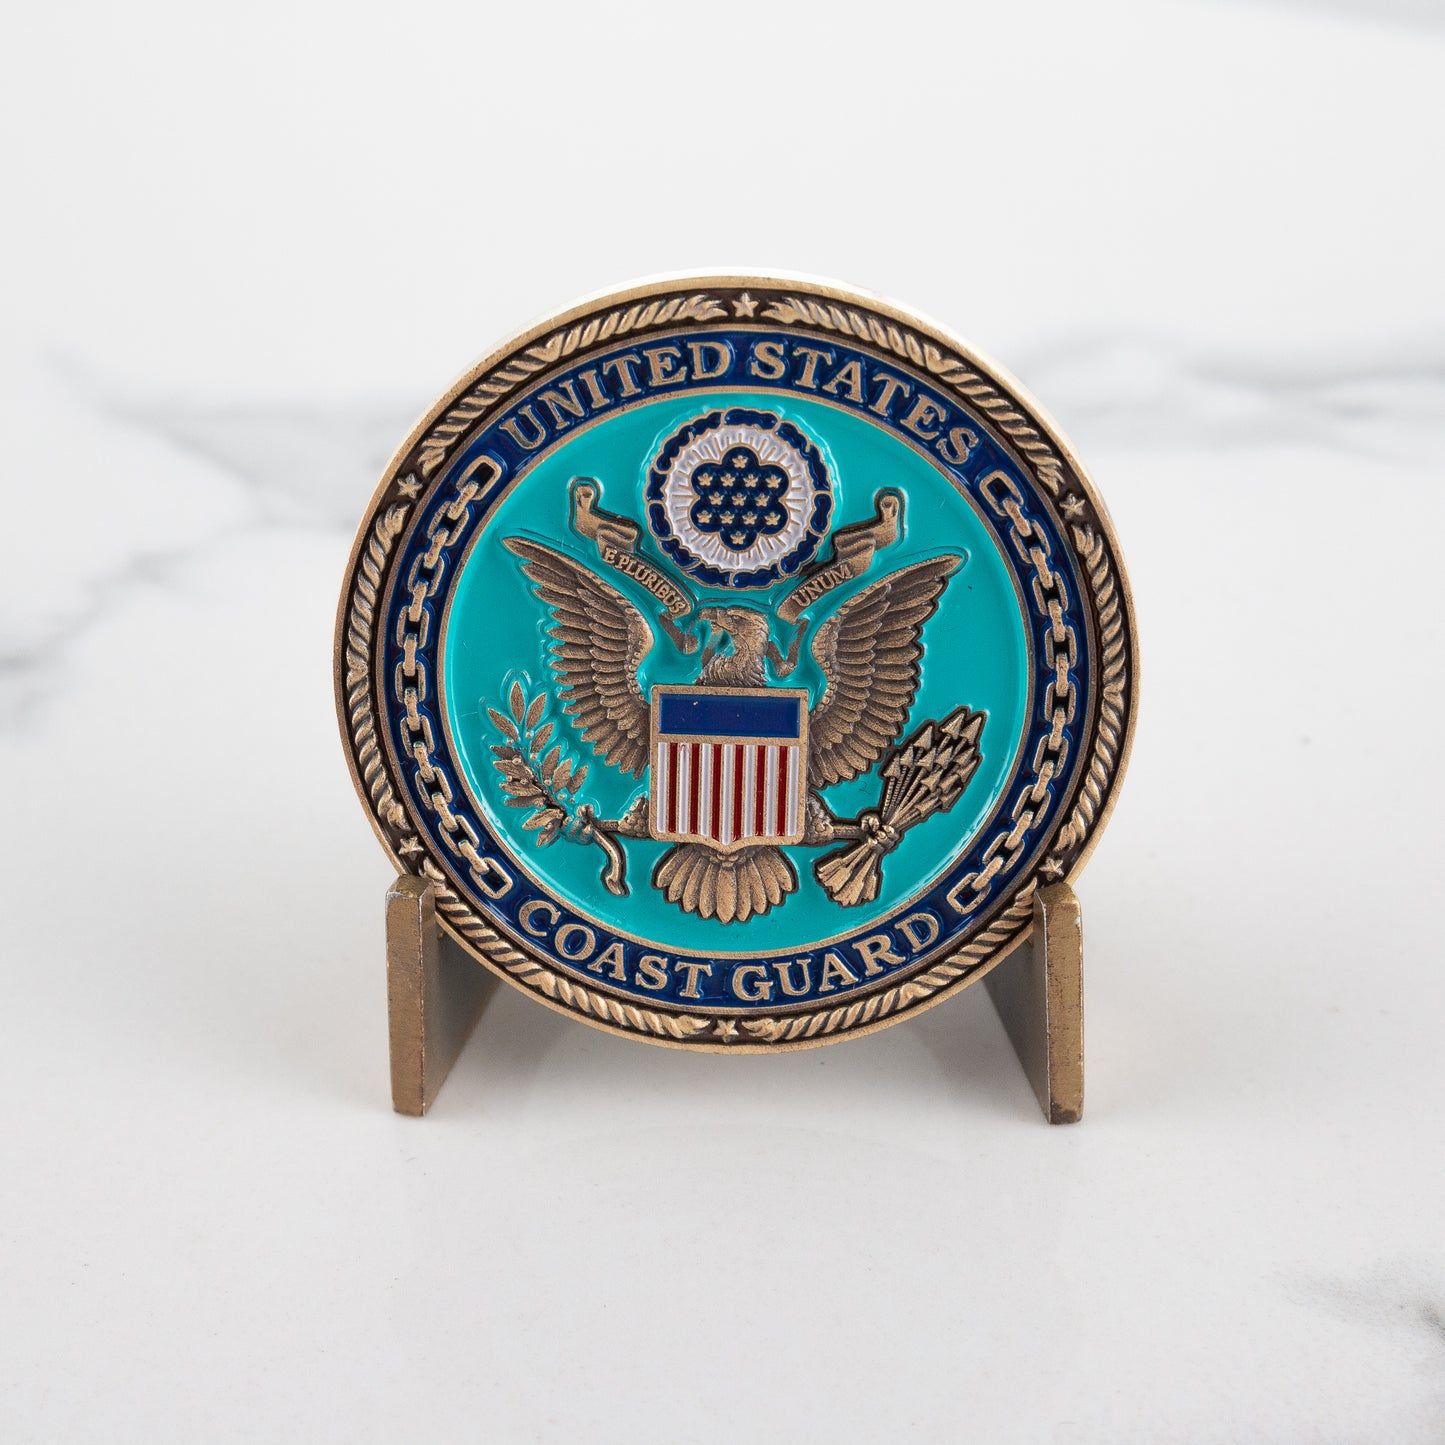 Coast Guard - Thank You For Your Service Coin